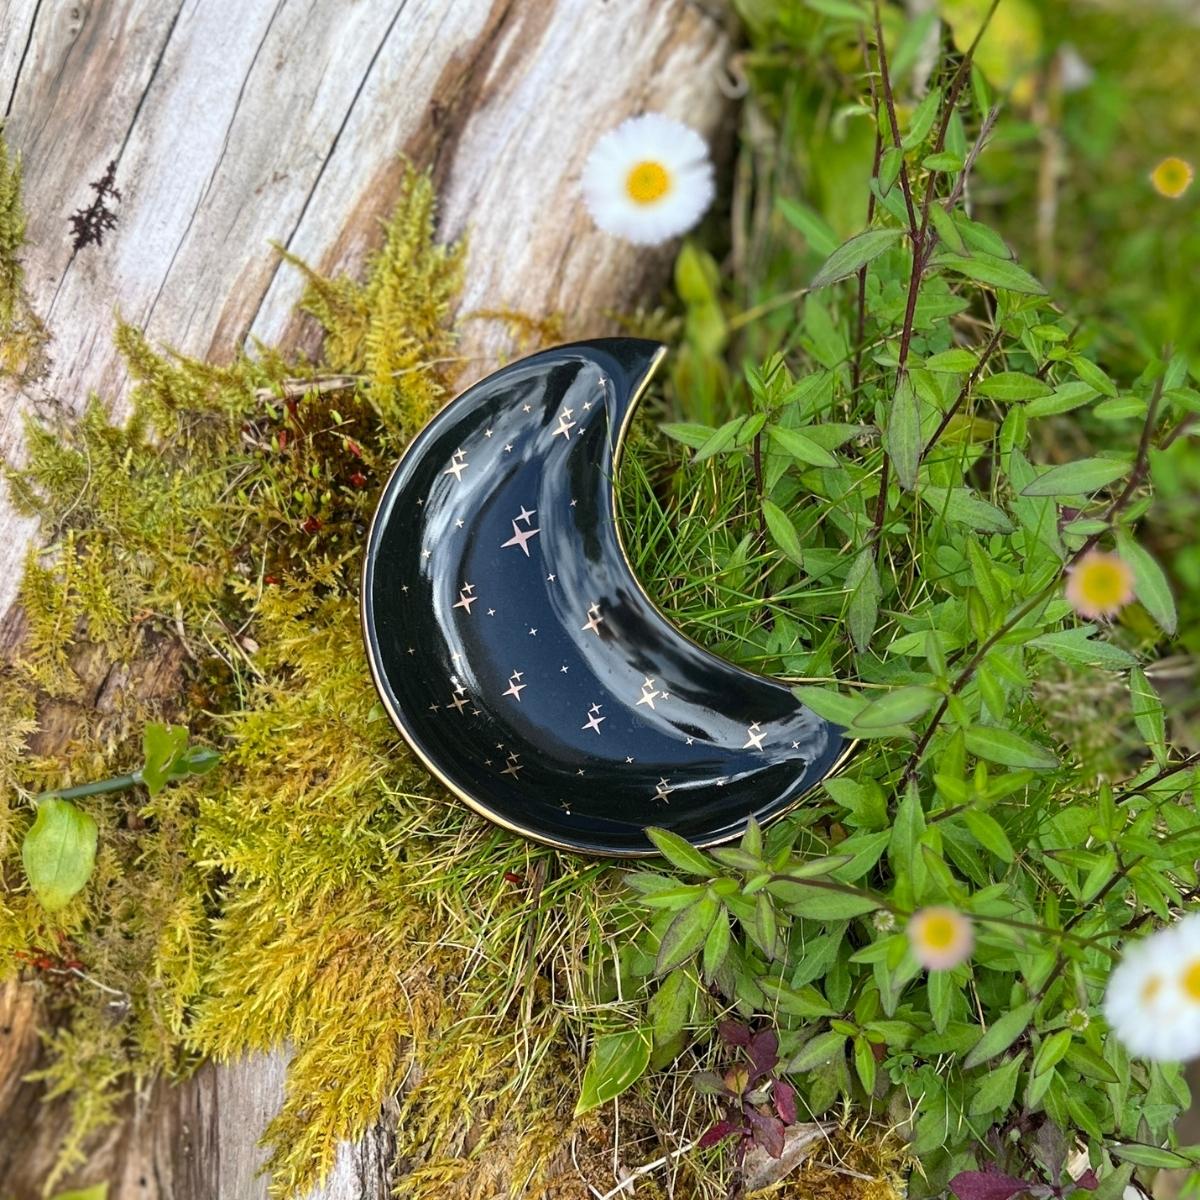 The Celeste Jewelry Dish is a beautiful and ethereal crescent-shaped ceramic dish, perfect for storing and displaying your favorite jewelry pieces. The dish features a stunning cosmic-inspired design, with gold stars and a black background that create a celestial and magical look.